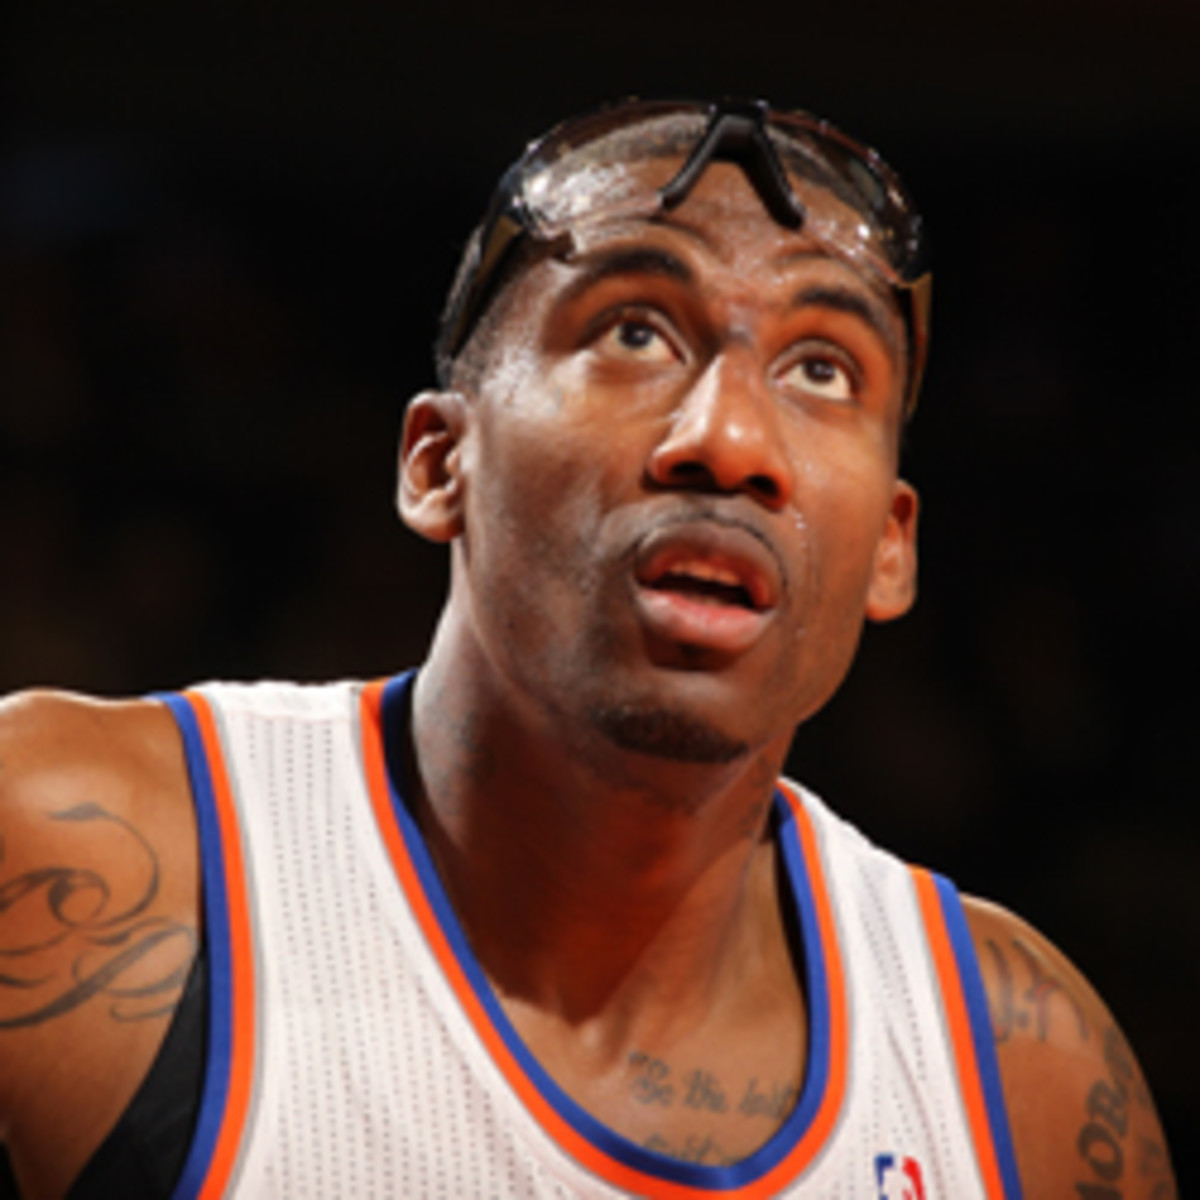 Amar'e Stoudemire has come off the bench in the Knicks' last nine games. (Nathaniel S. Butler/NBAE via Getty Images)